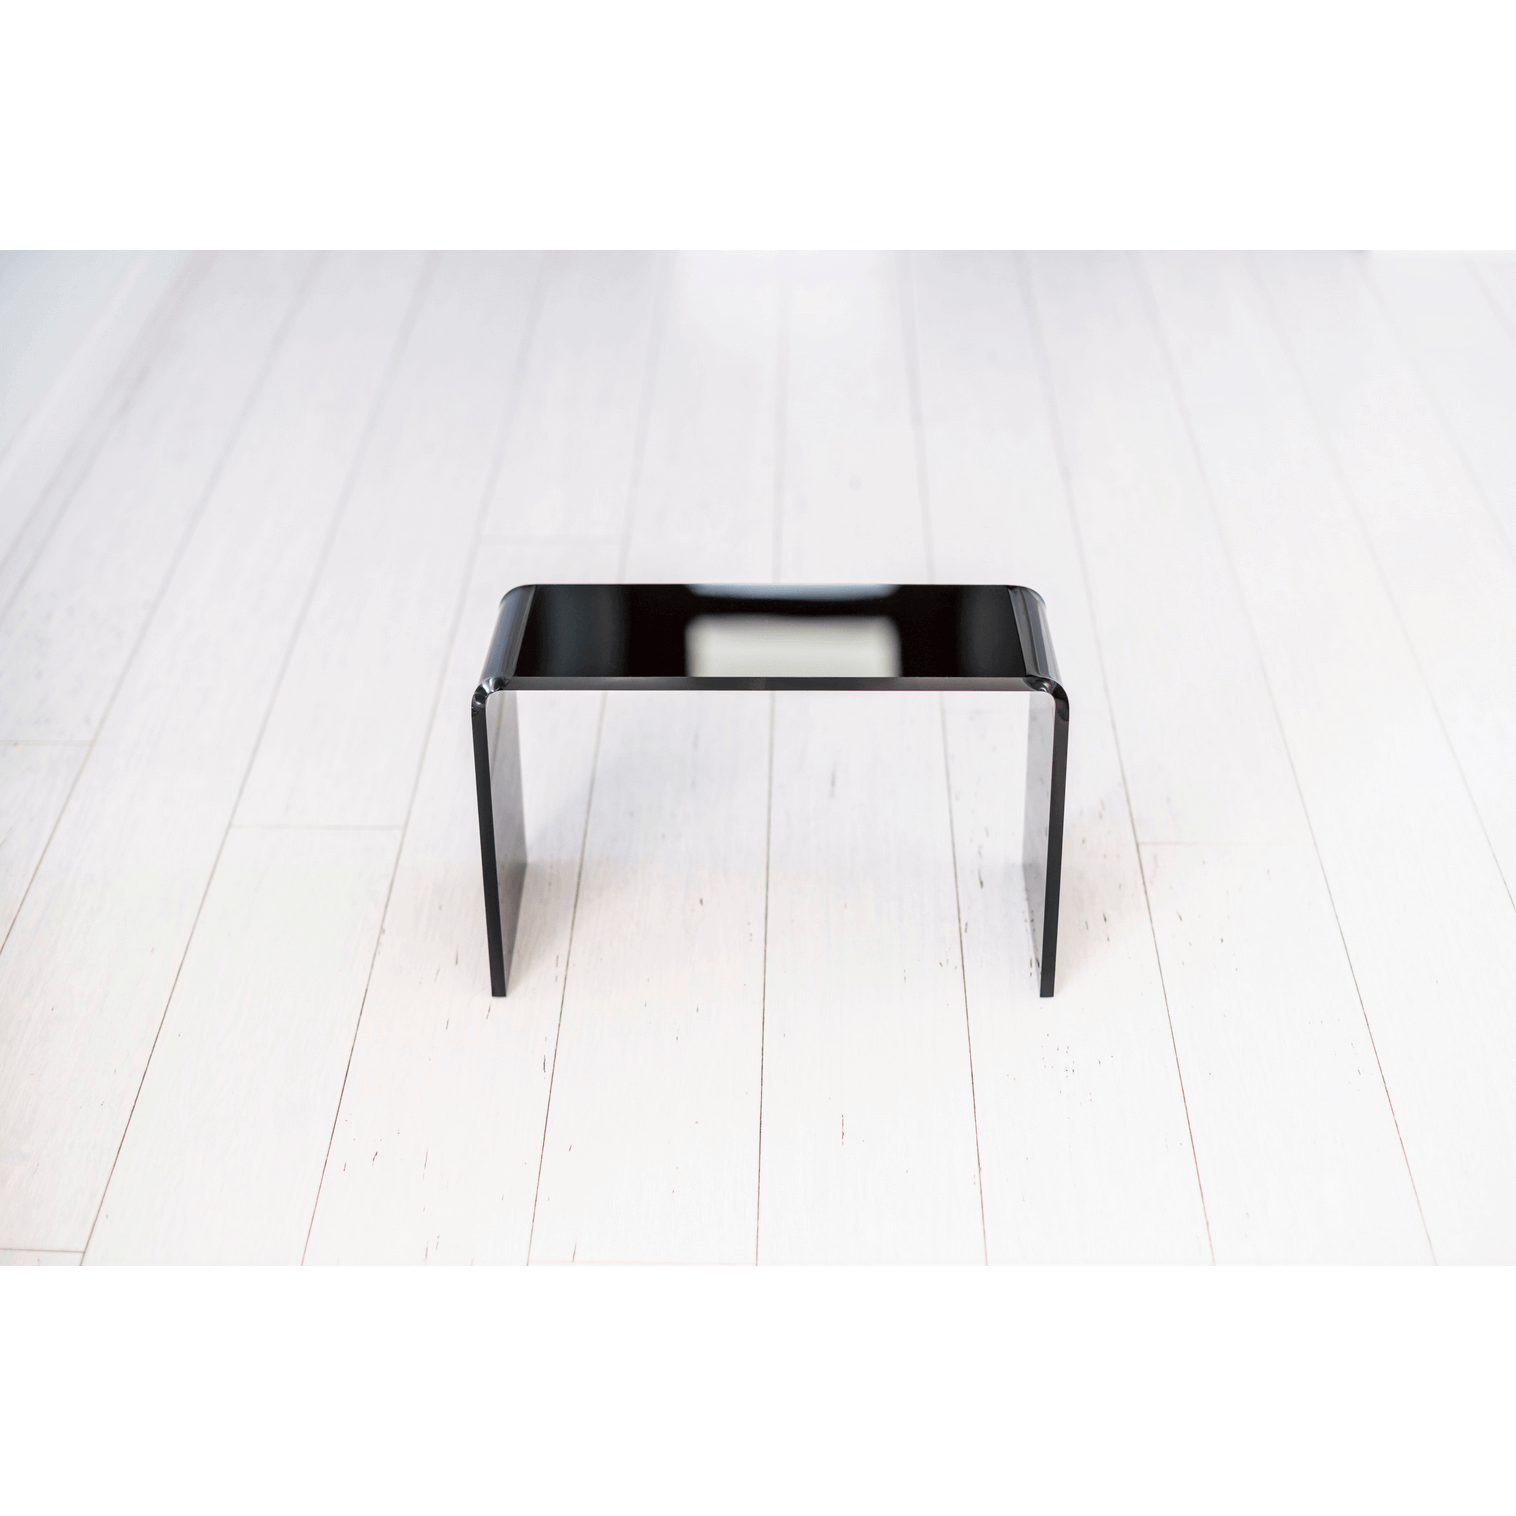 The PROPPR Acer - Black Toilet Foot Stool - front angled view in a bathroom